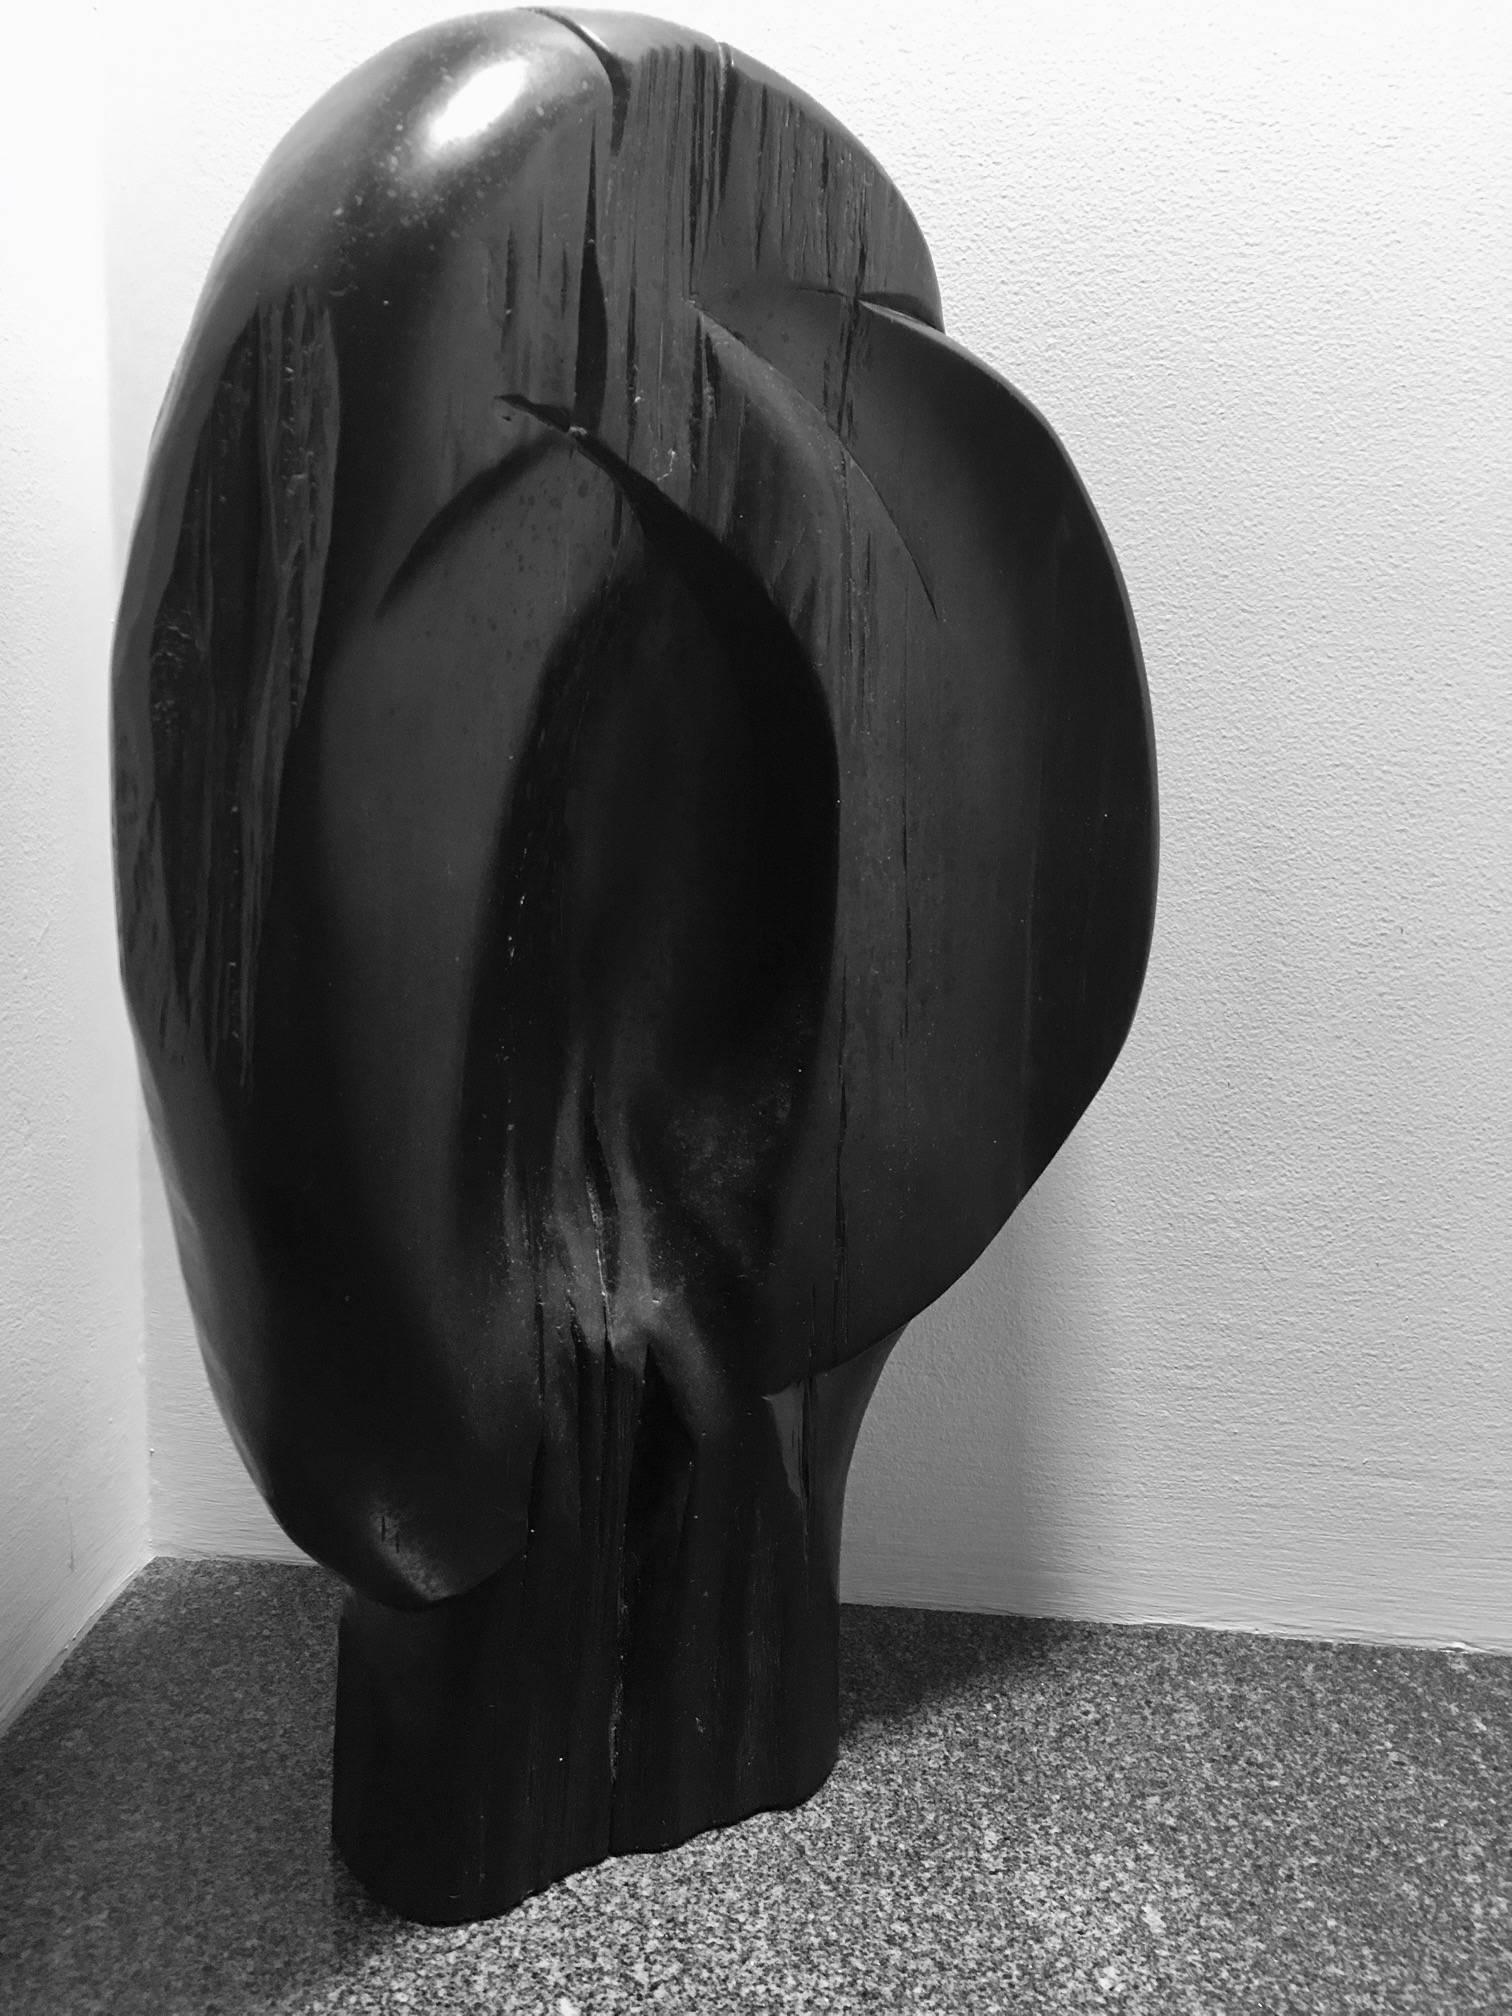 Important large (18 1/2 by 11 1/2 w) carved ebony wood sculpture by Alexandre Noll. Provenance - Delarenzo  (Galarie 1950)